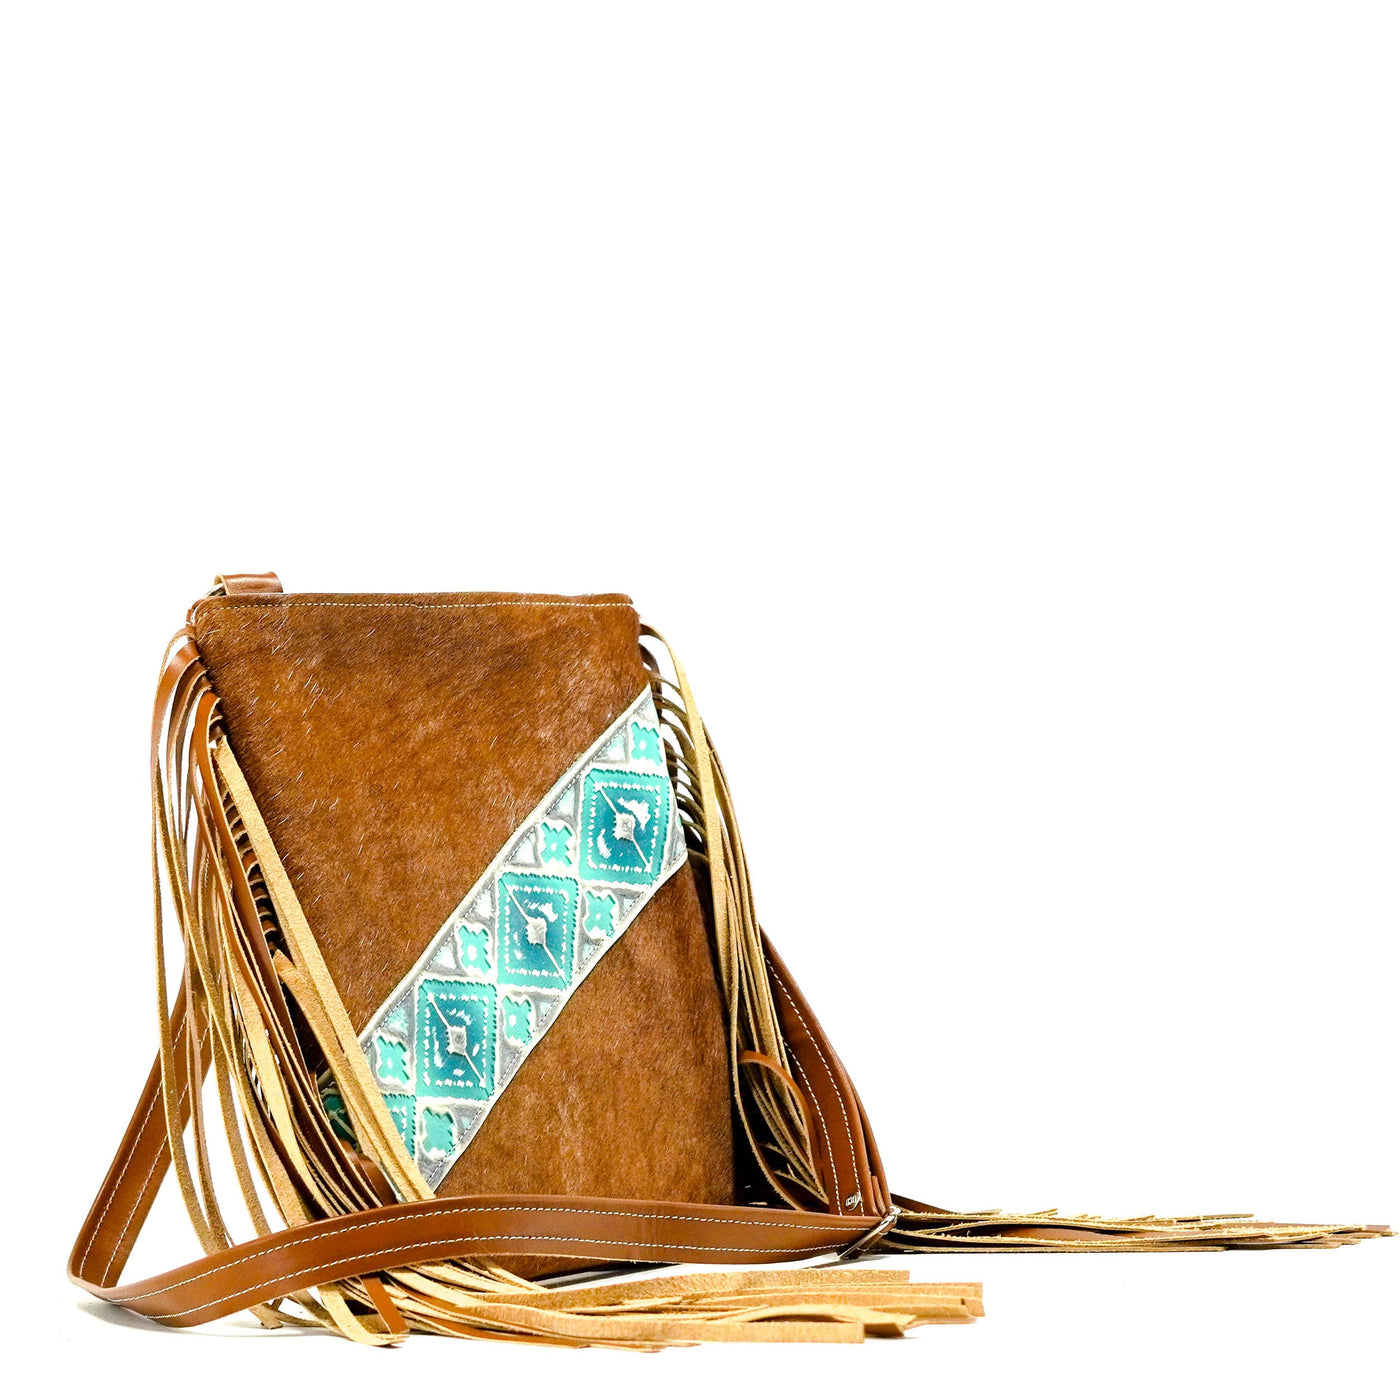 Shania - Light Brindle w/ Royston Navajo-Shania-Western-Cowhide-Bags-Handmade-Products-Gifts-Dancing Cactus Designs